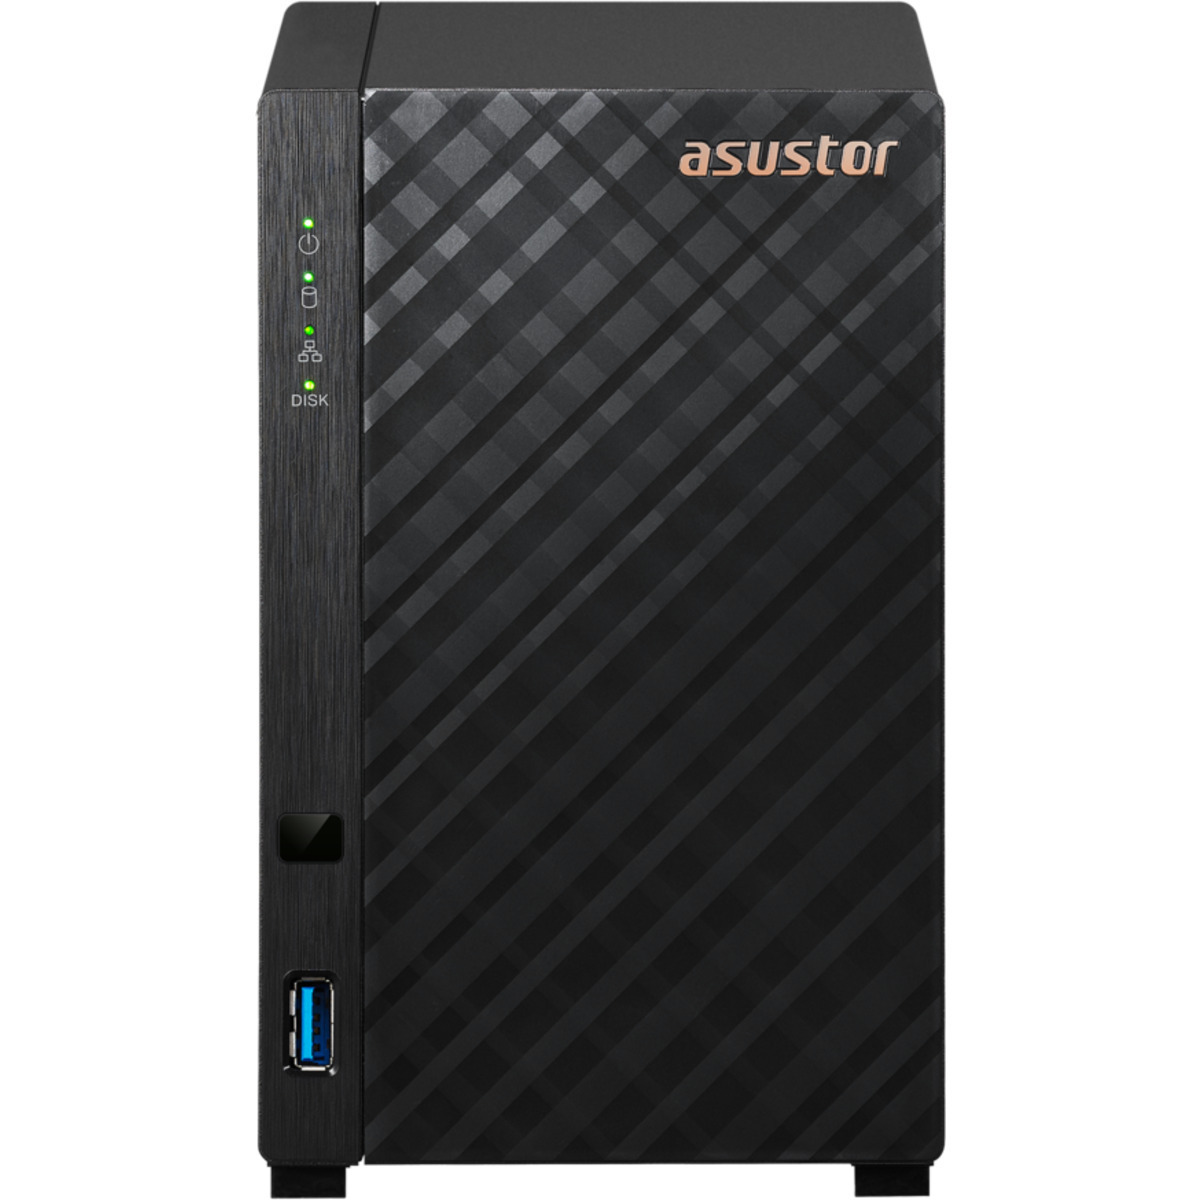 ASUSTOR DRIVESTOR 2 Lite AS1102TL 12tb 2-Bay Desktop Personal / Basic Home / Small Office NAS - Network Attached Storage Device 2x6tb Seagate IronWolf ST6000VN006 3.5 5400rpm SATA 6Gb/s HDD NAS Class Drives Installed - Burn-In Tested DRIVESTOR 2 Lite AS1102TL